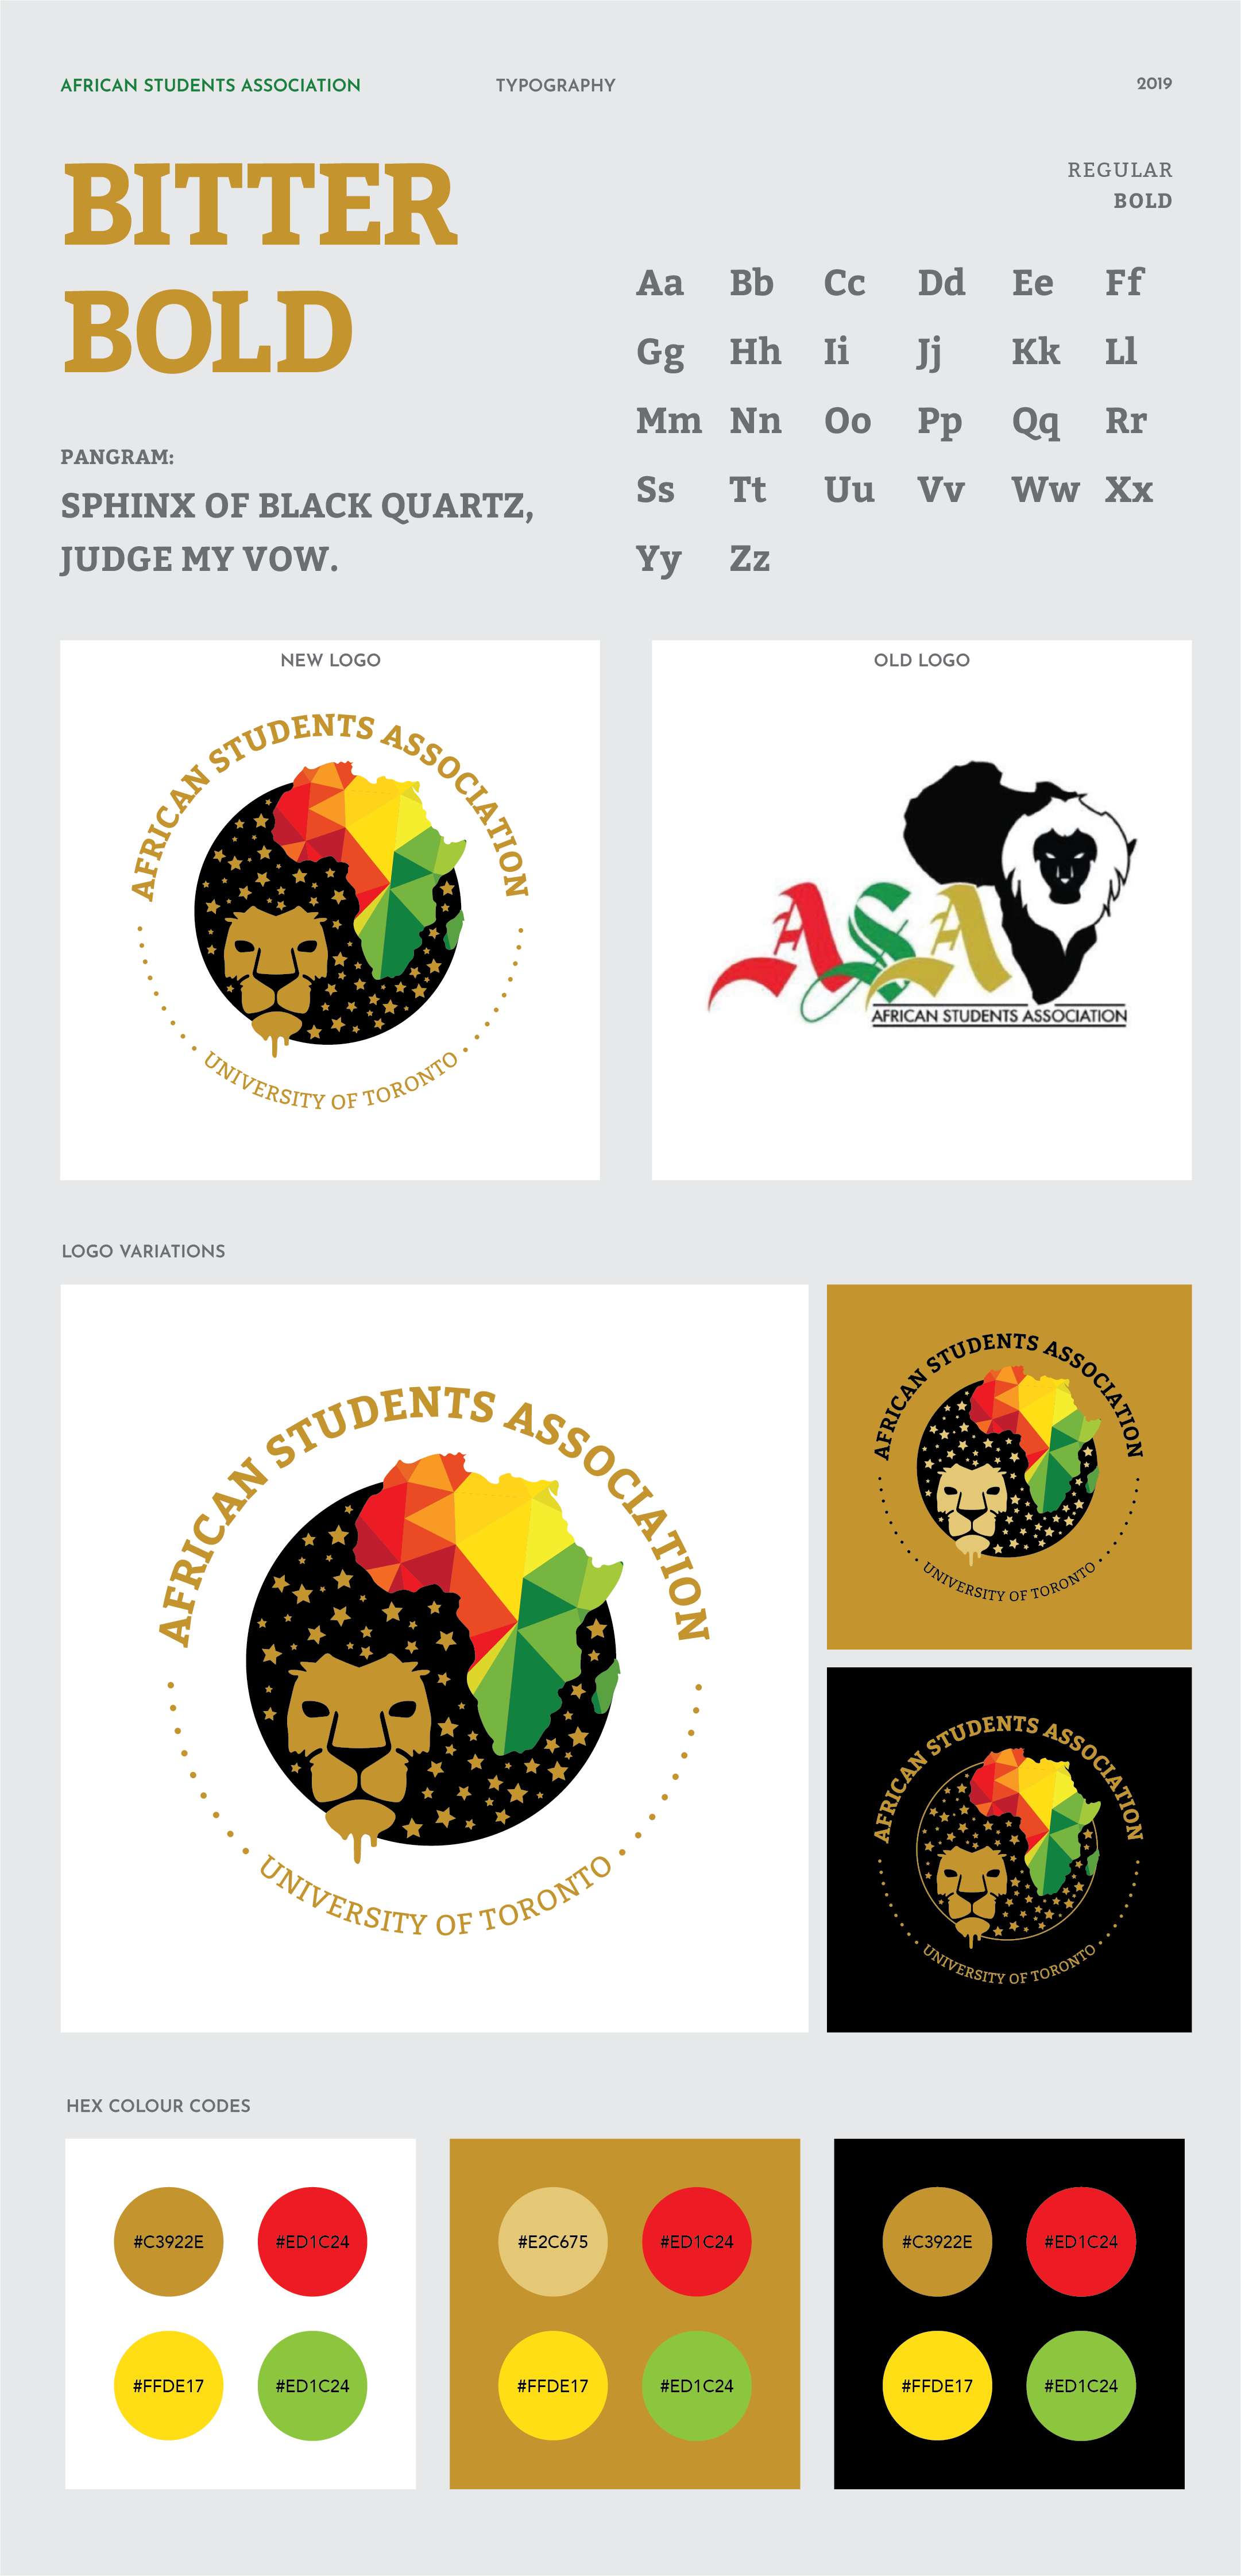 African Students Association - brand guides